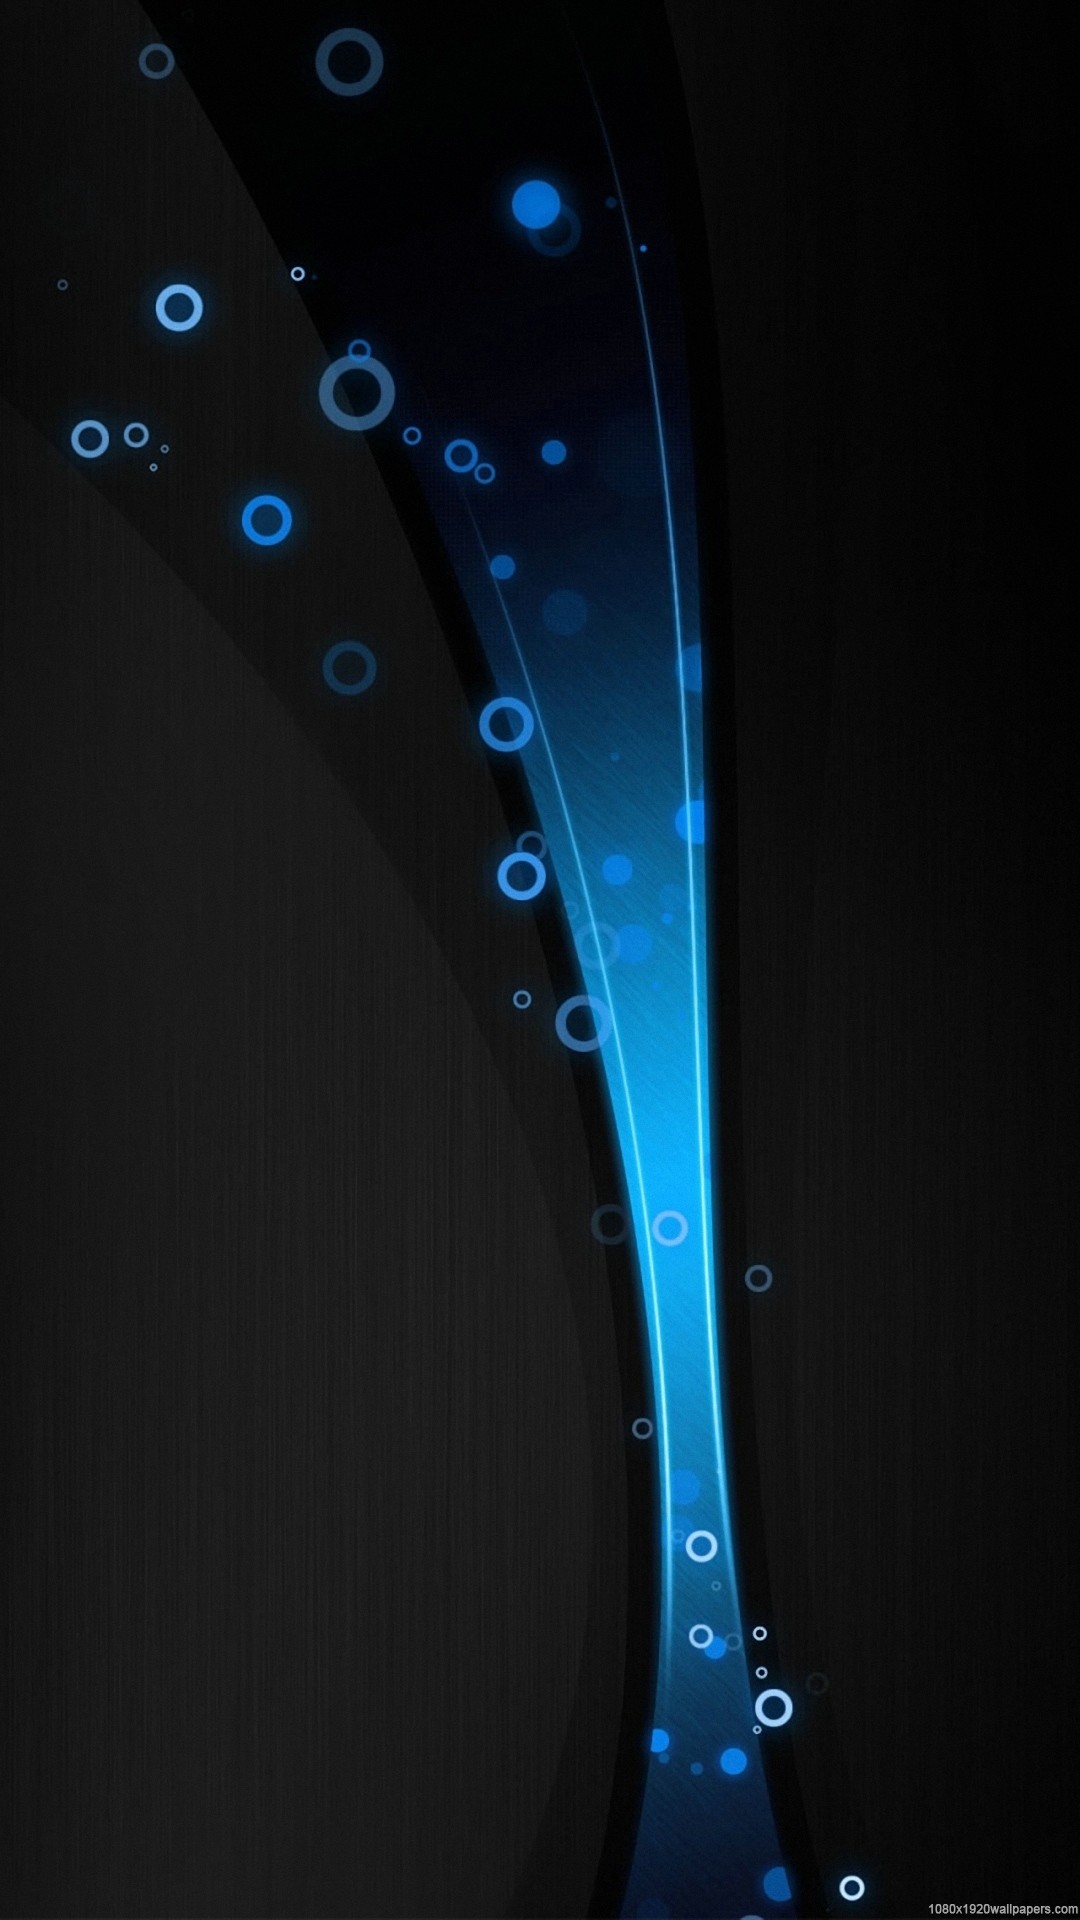 1080x1920 Hd Wallpaper For Android Phone | Free | Download pertaining to Blue Hd  Wallpaper 1080P For